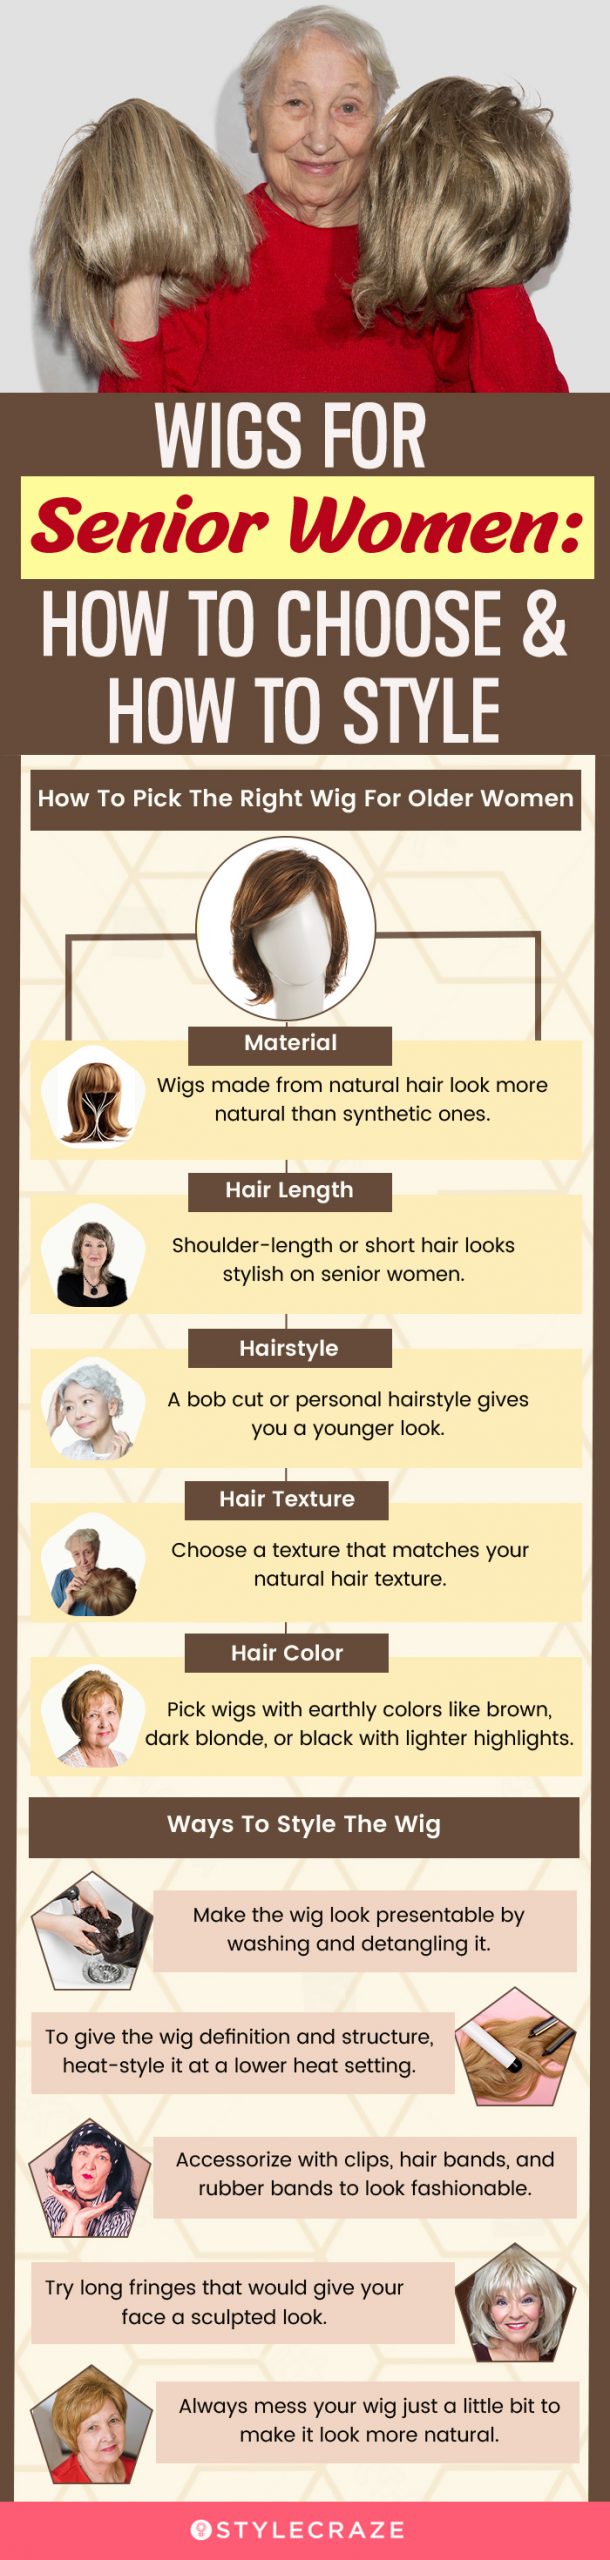 Wigs For Senior Women: How To Choose & How To Style (infographic)